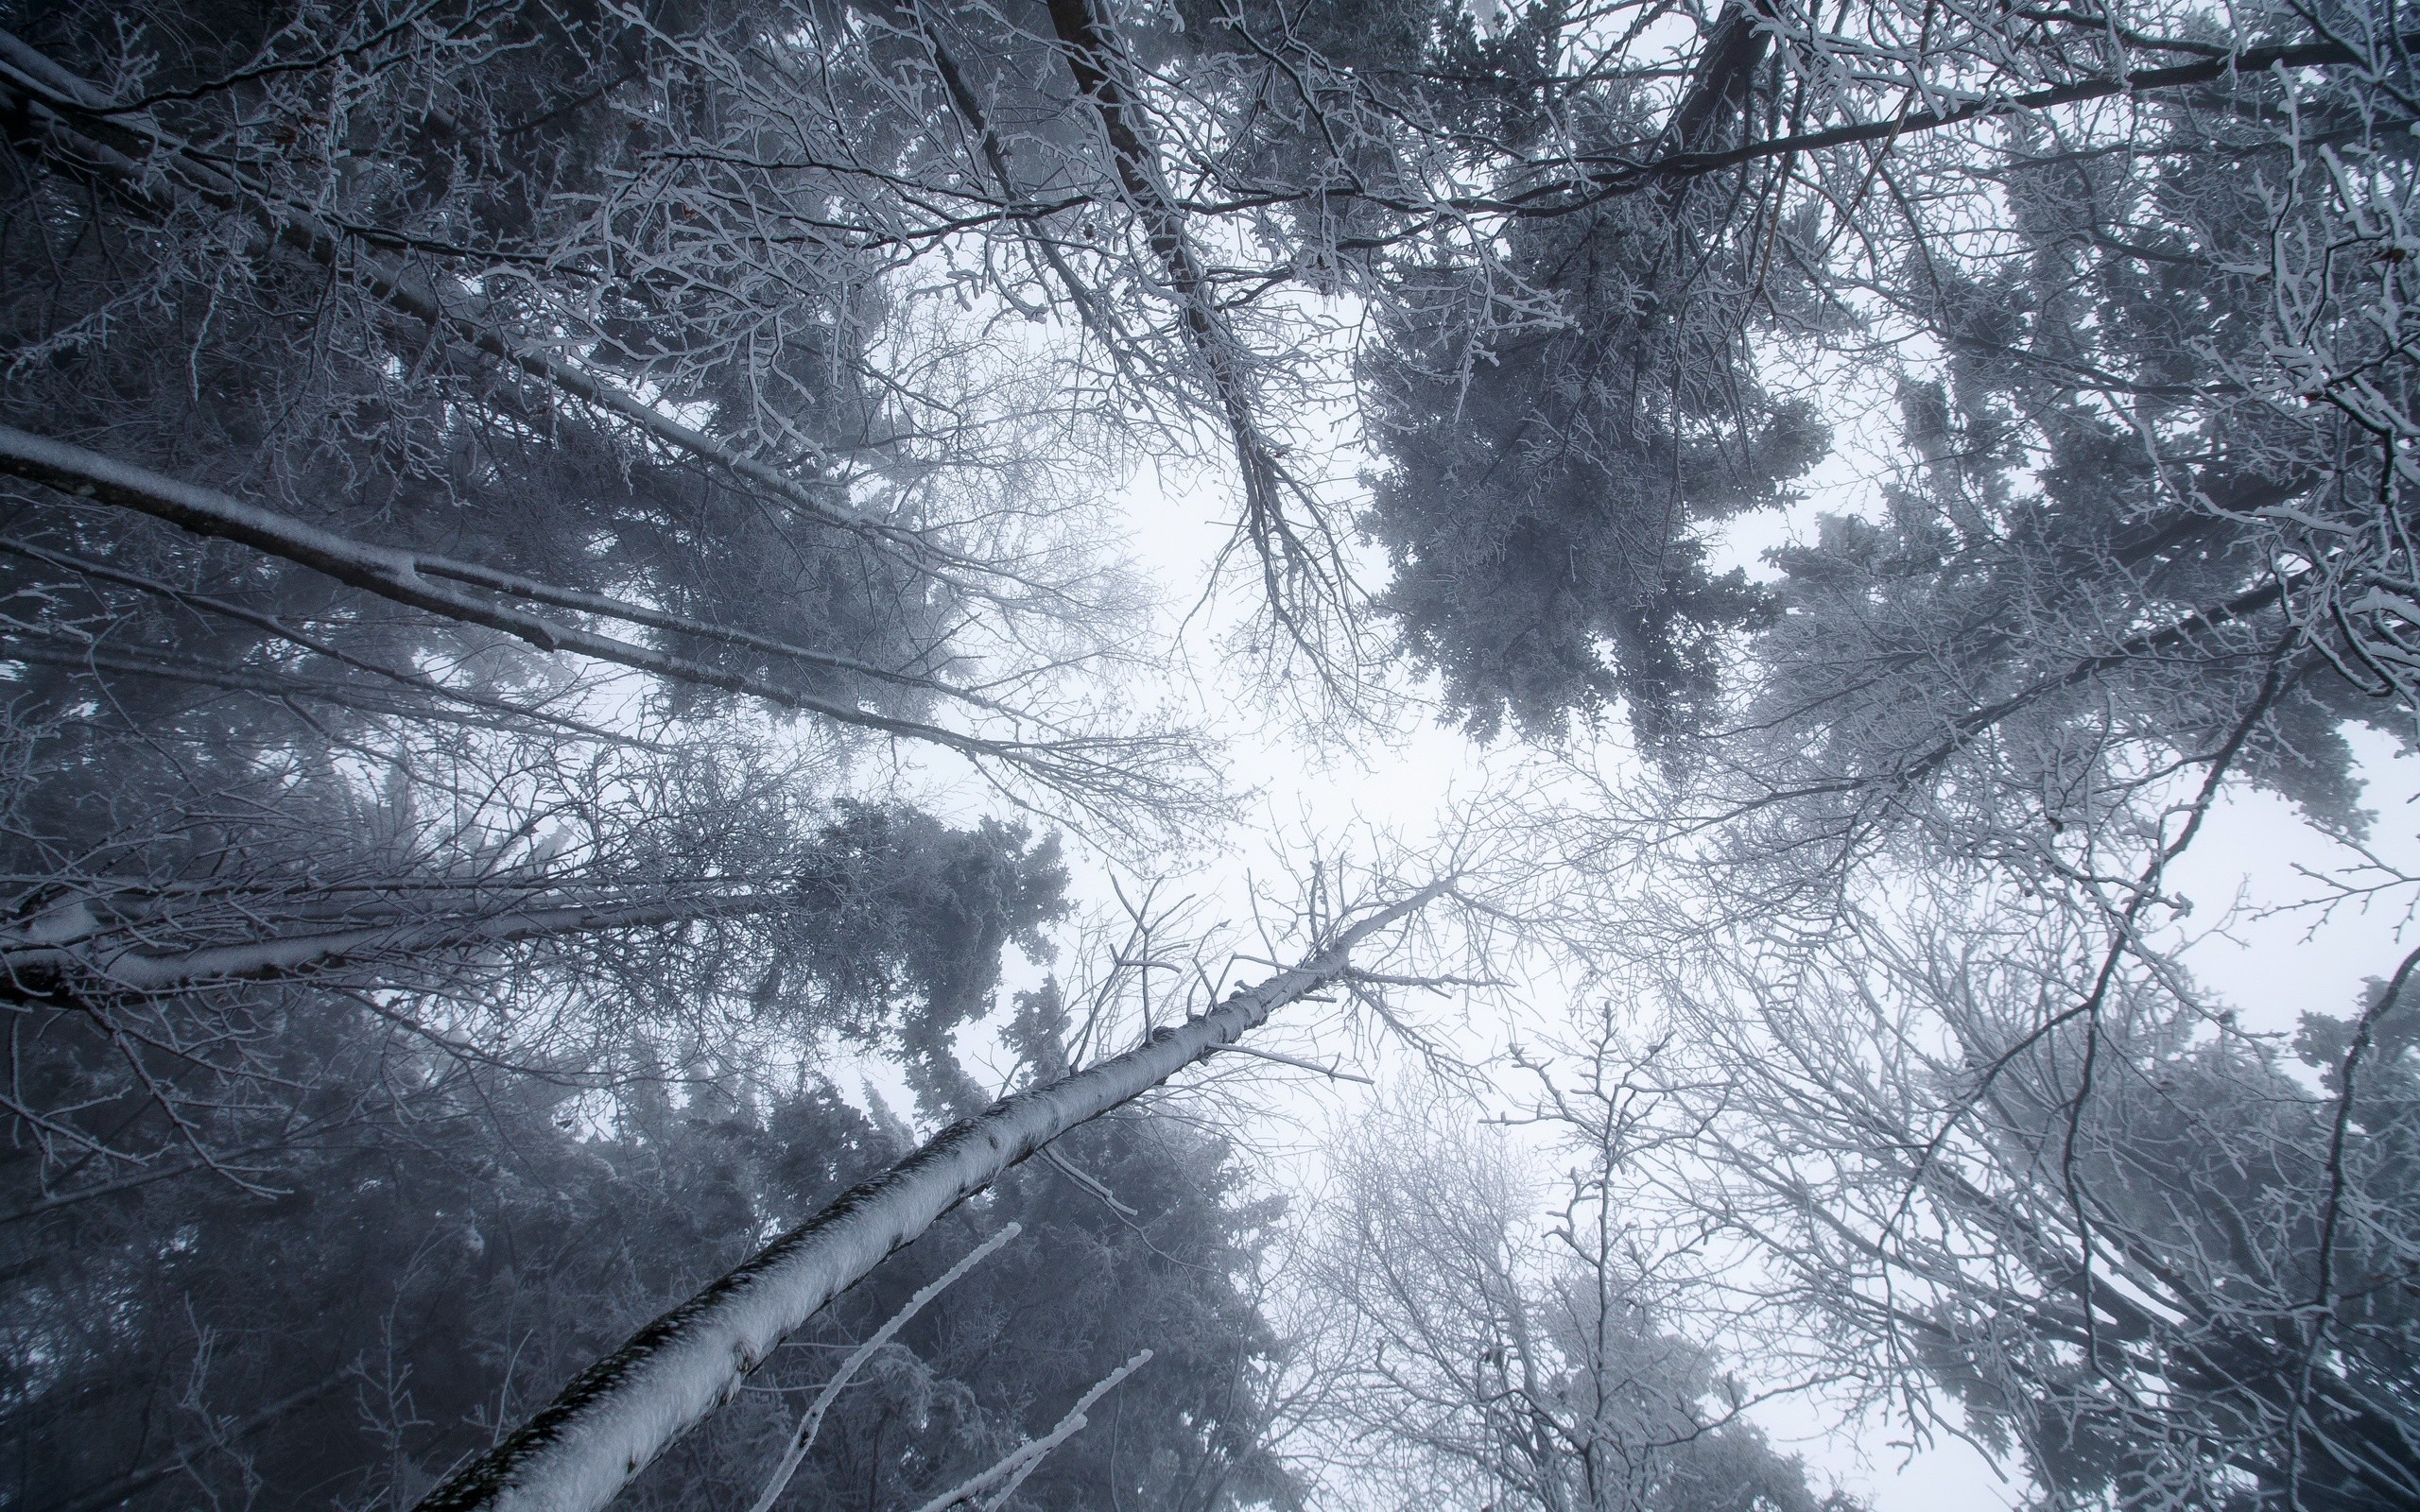 General 2560x1600 trees winter ice snow cold nature worm's eye view bottom view